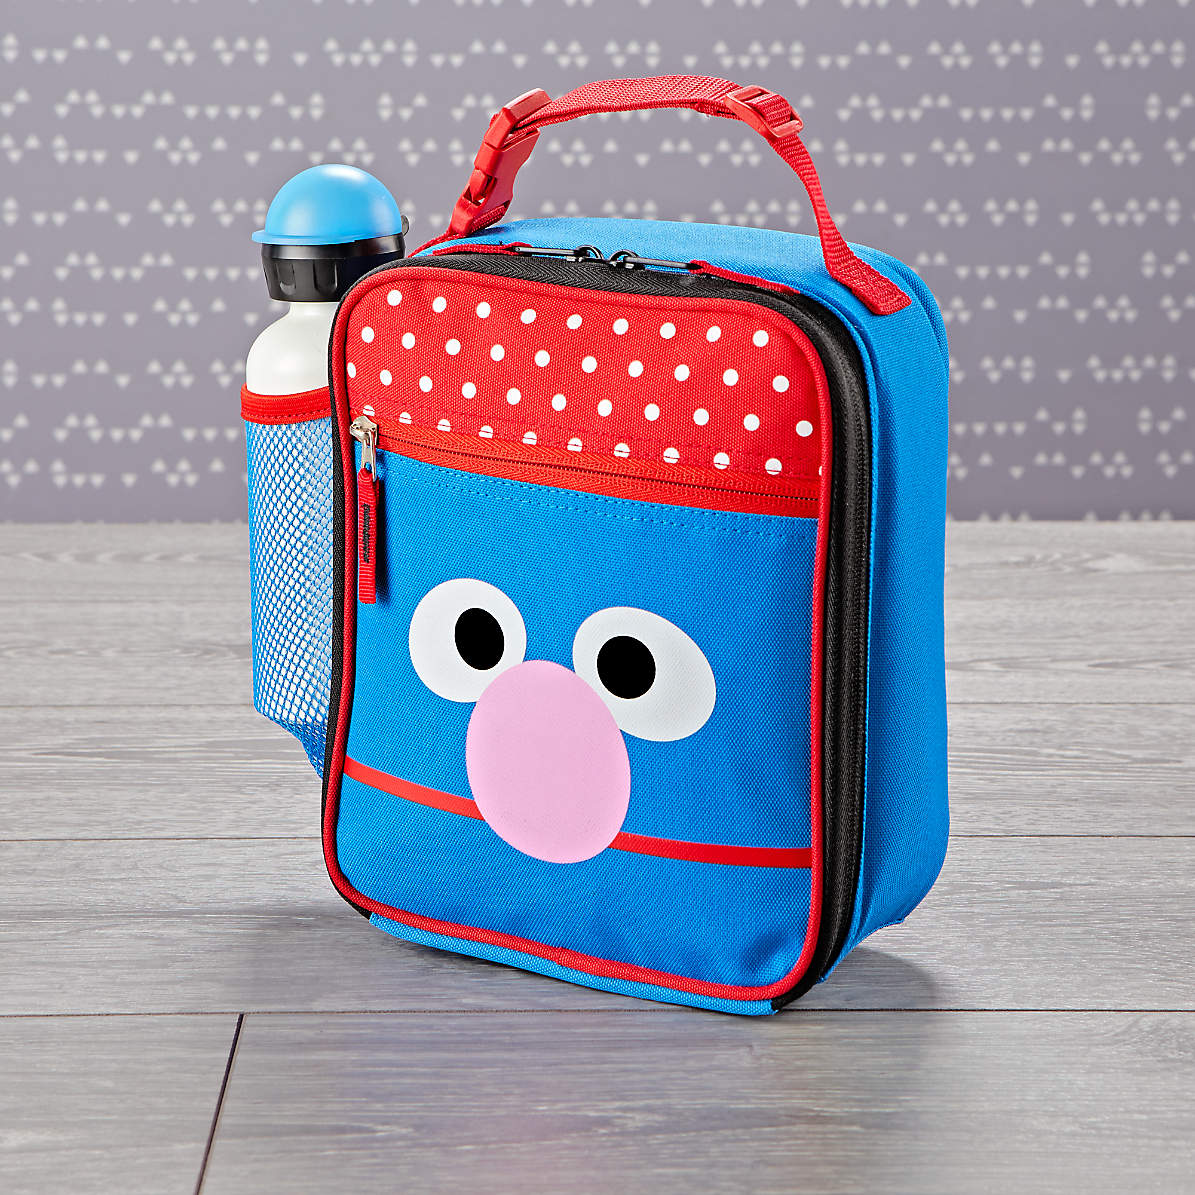 Sesame Street Grover Lunch Box Reviews Crate And Barrel